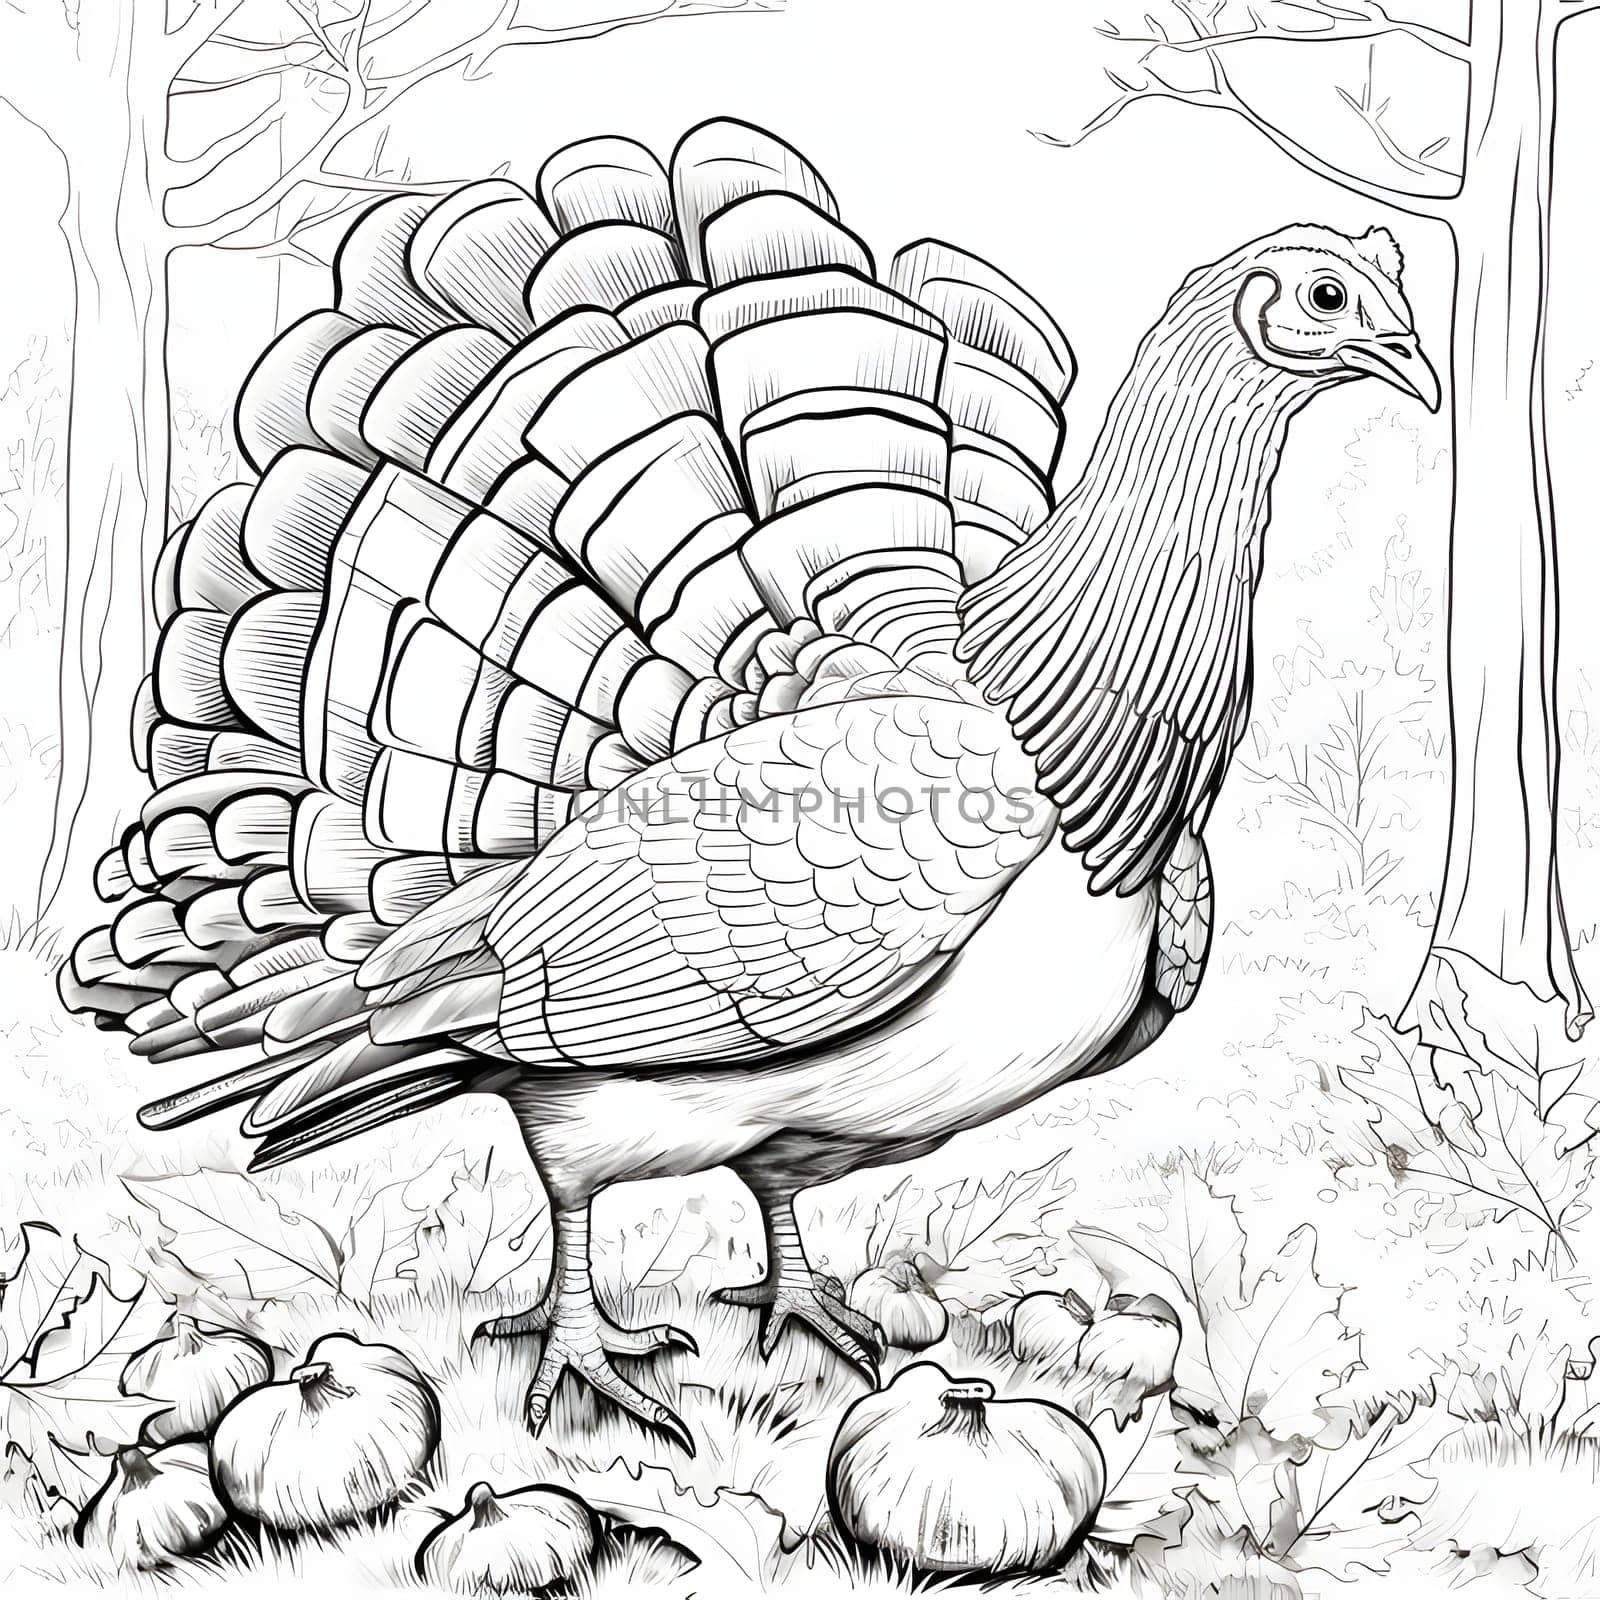 Great turkey in the woods around the leaves of pumpkins garlic. Black and White coloring book. Turkey as the main dish of thanksgiving for the harvest. An atmosphere of joy and celebration.